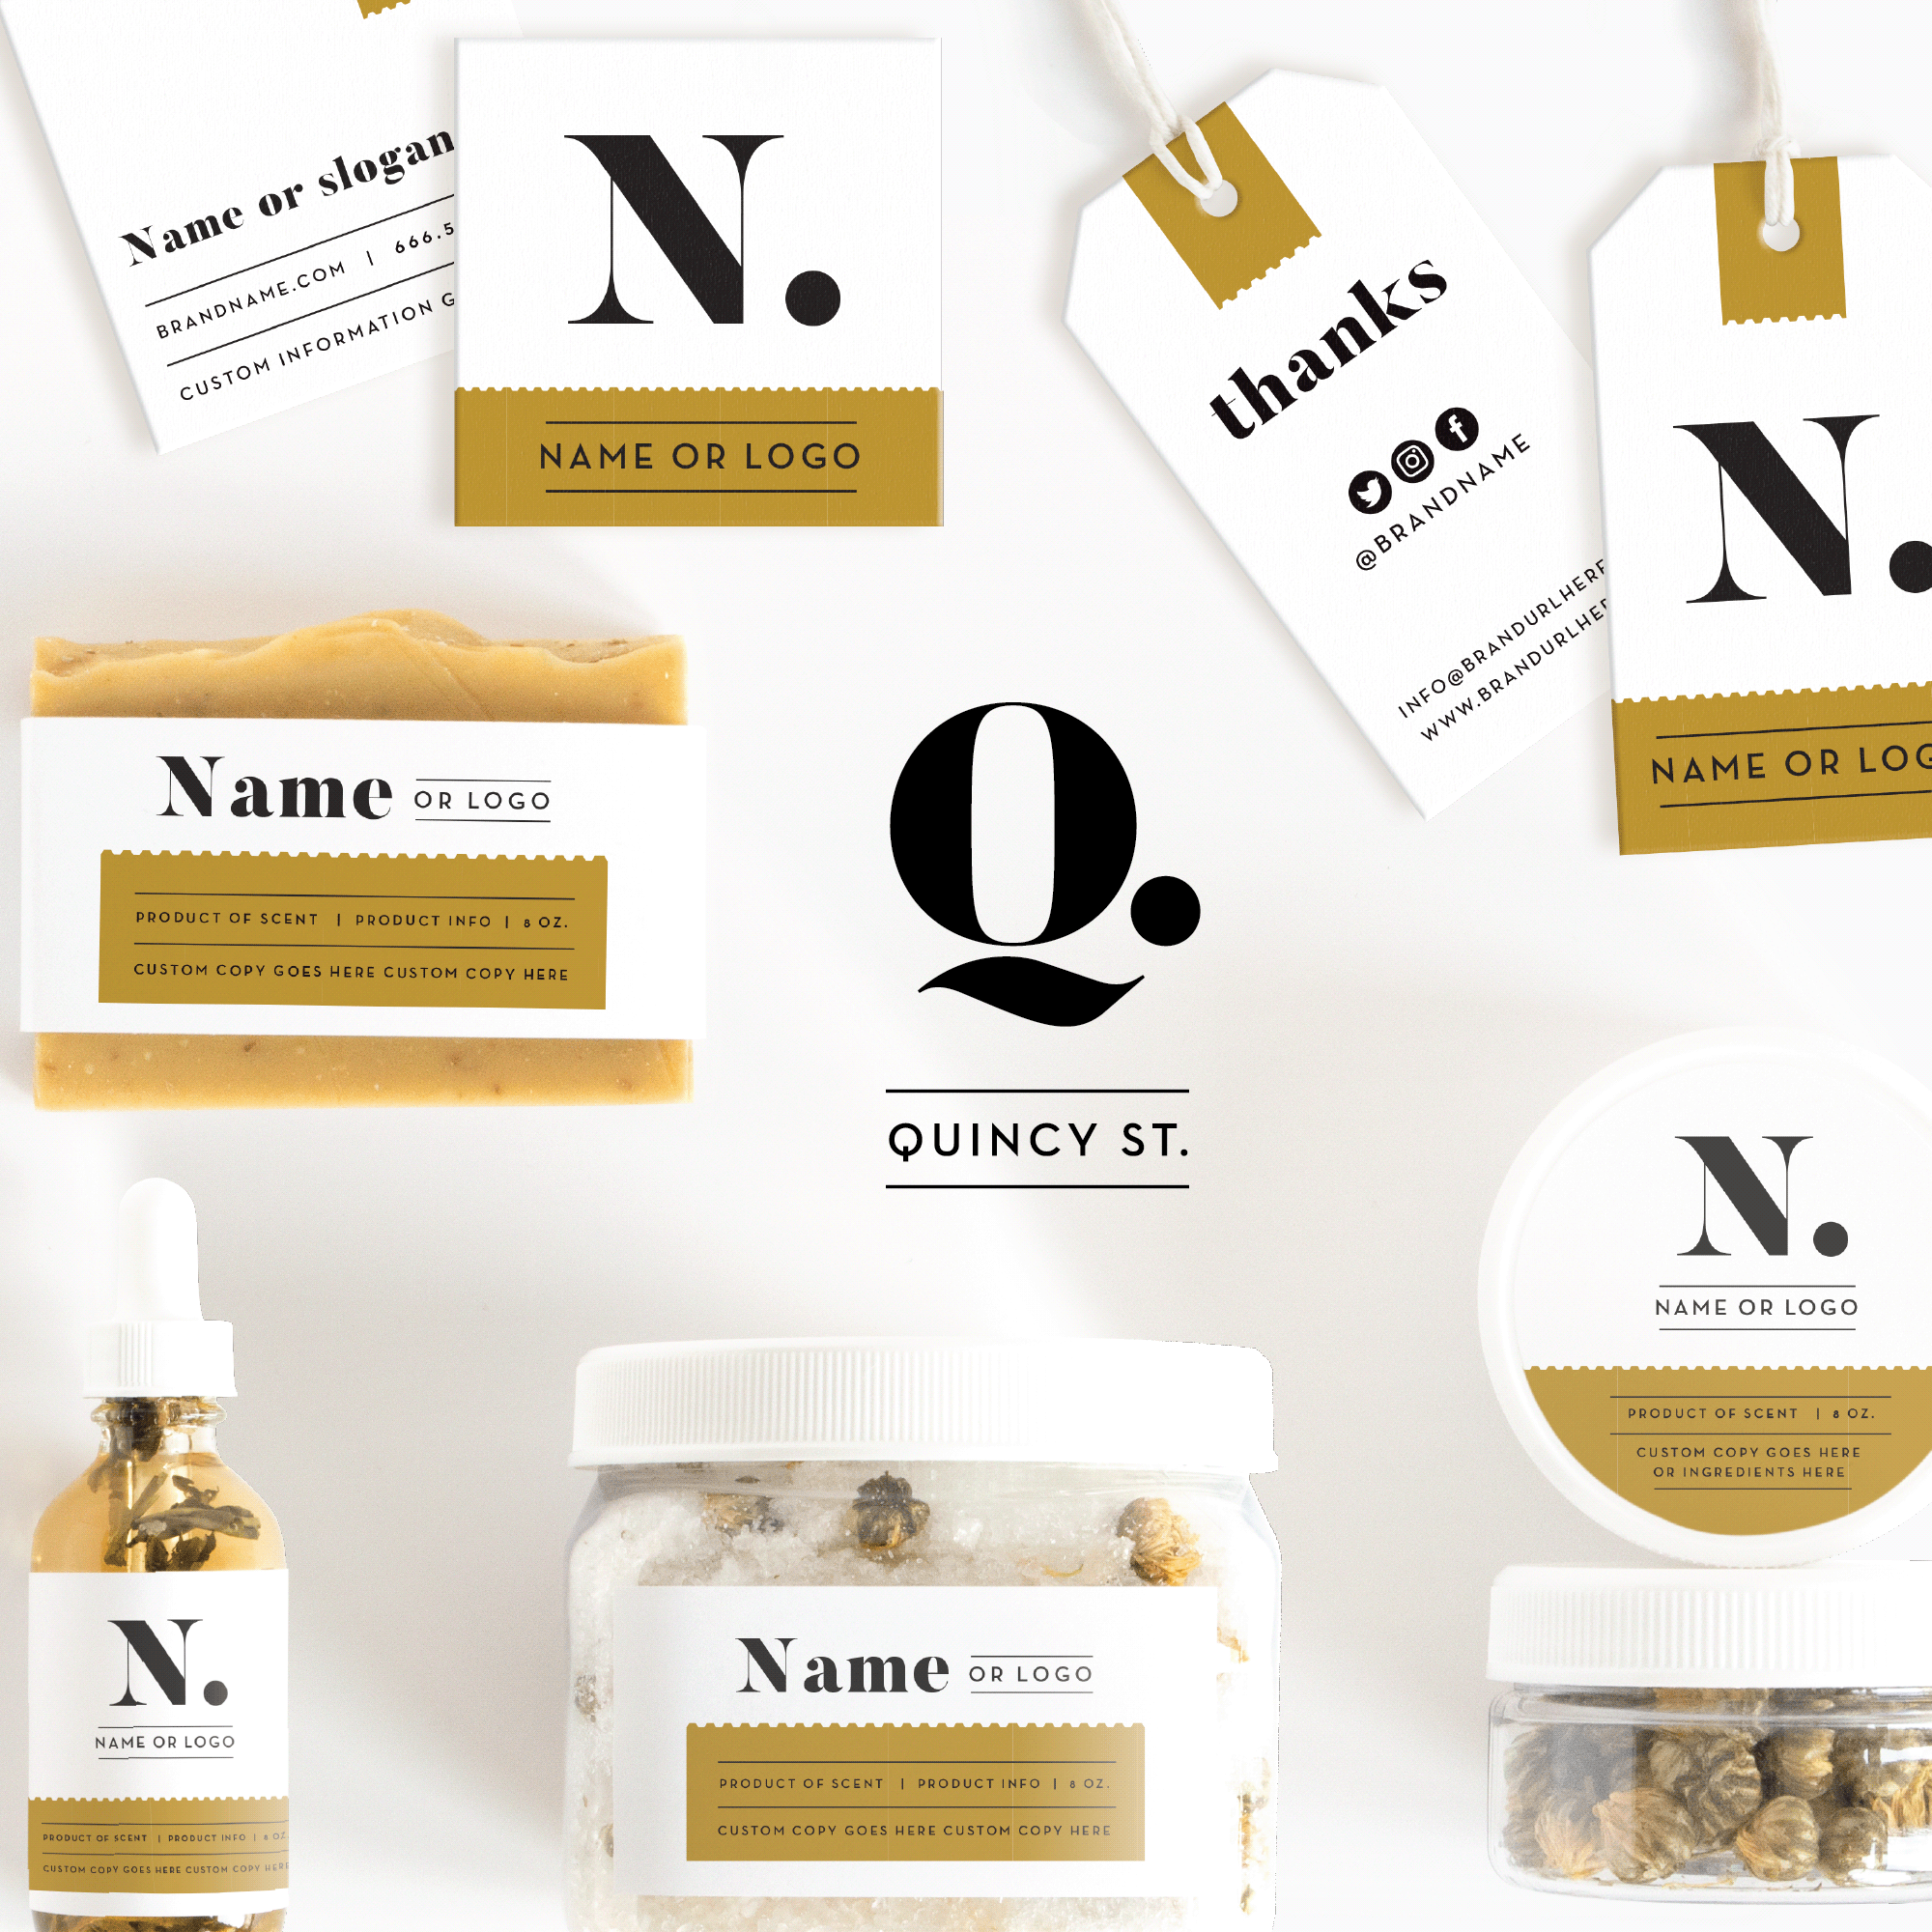 Quincy Street Round Product Label